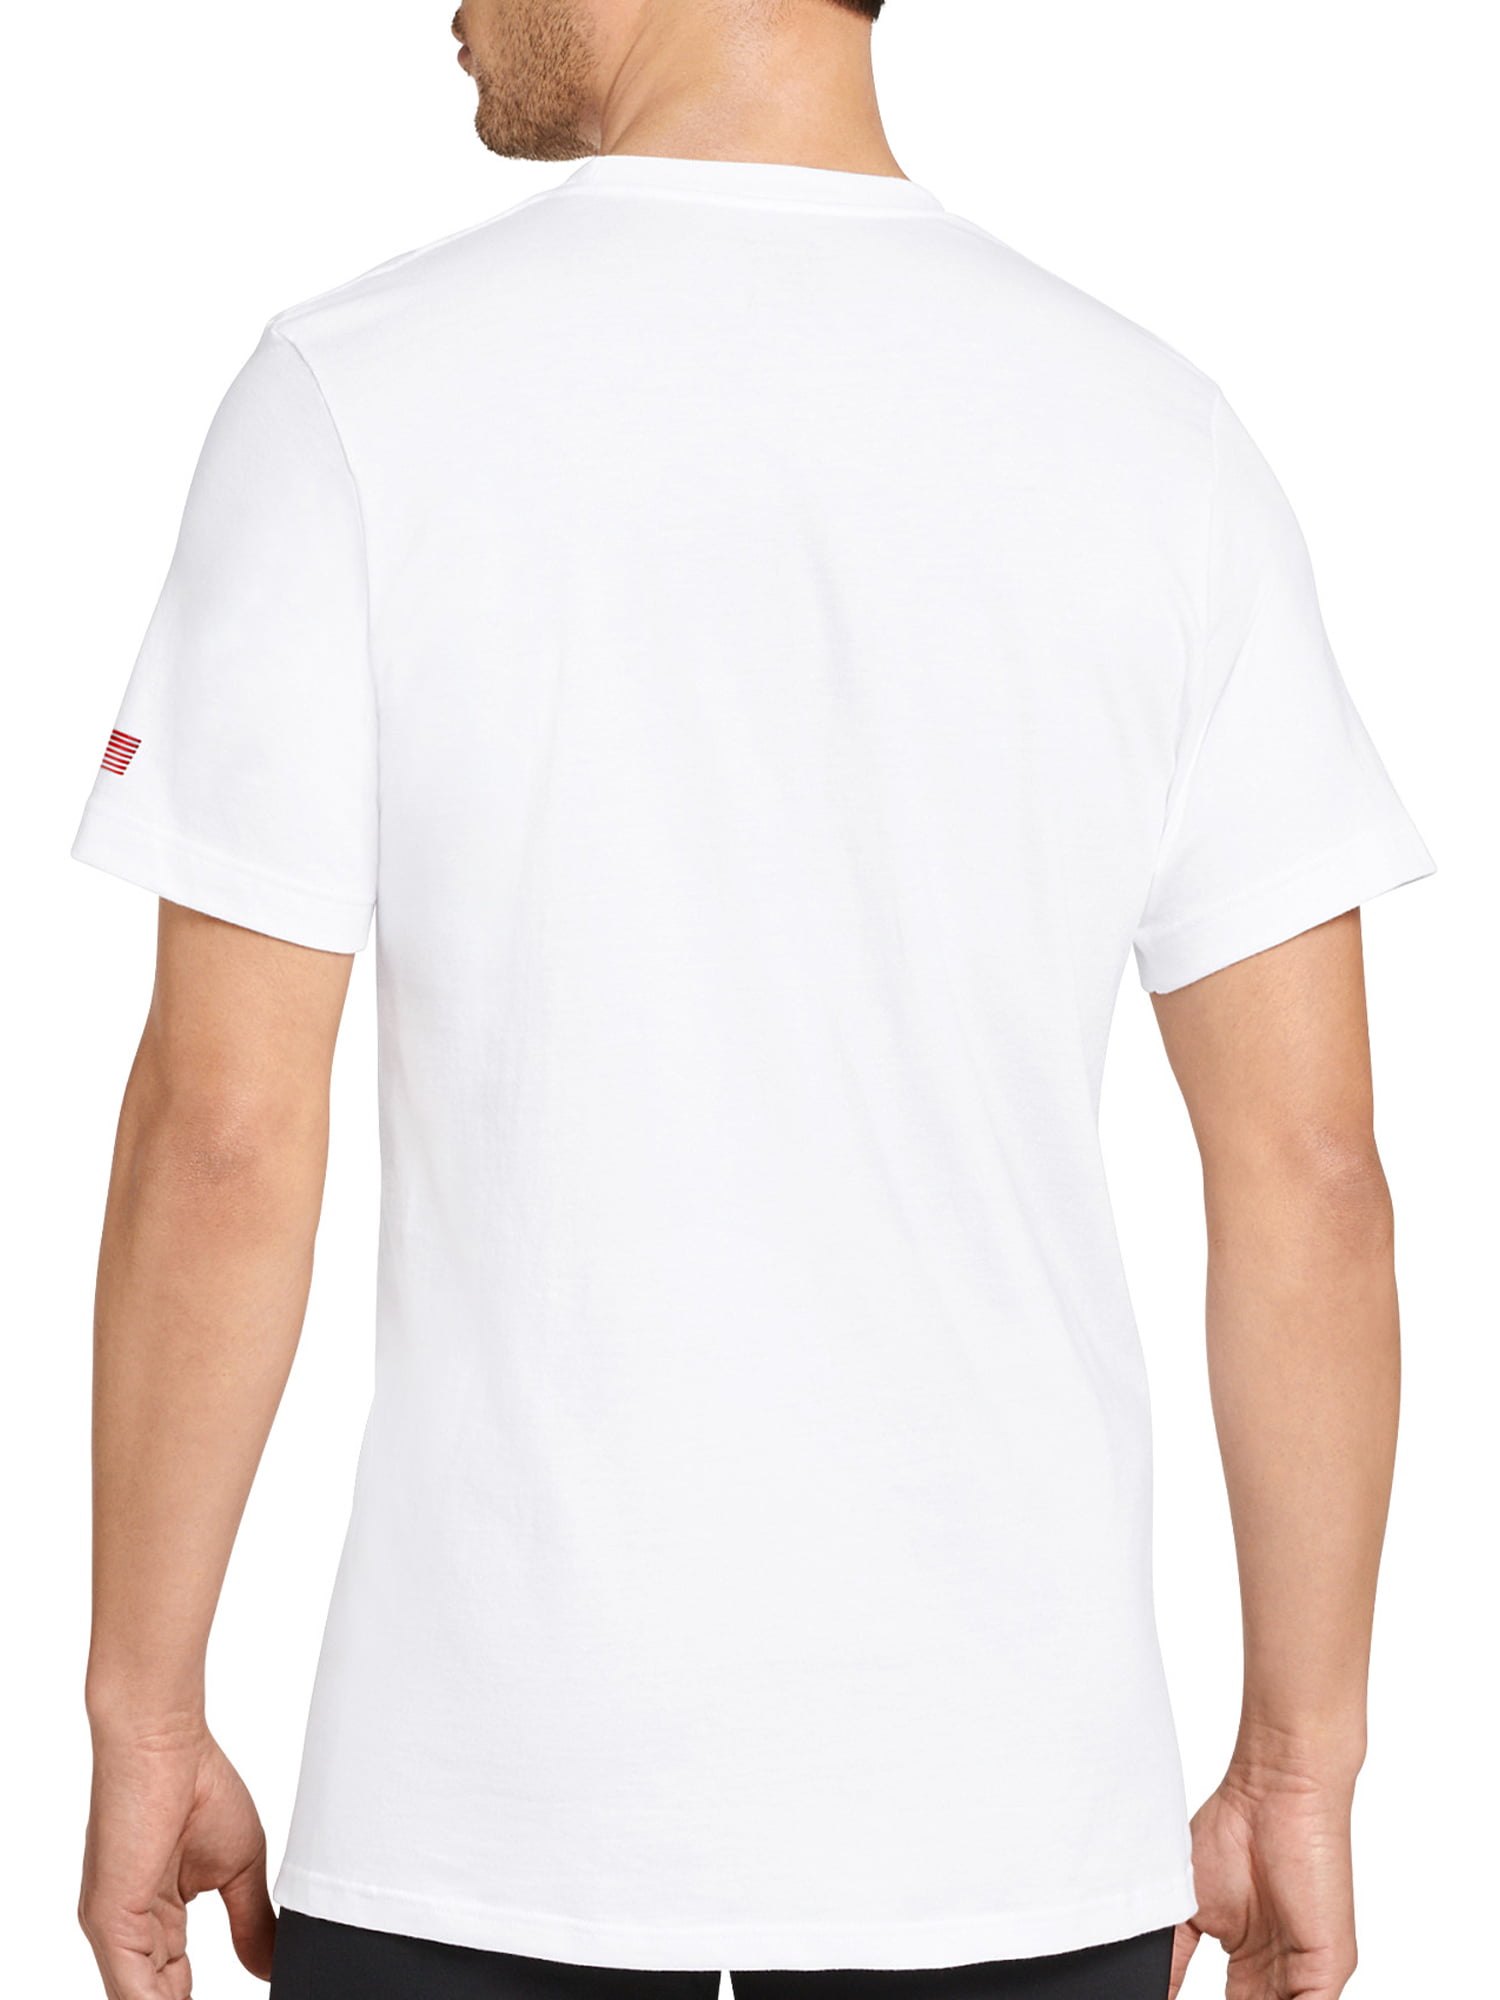 White | 100% Cotton Jersey 12 Ounce (Made in America) - SKU 6739 #S823